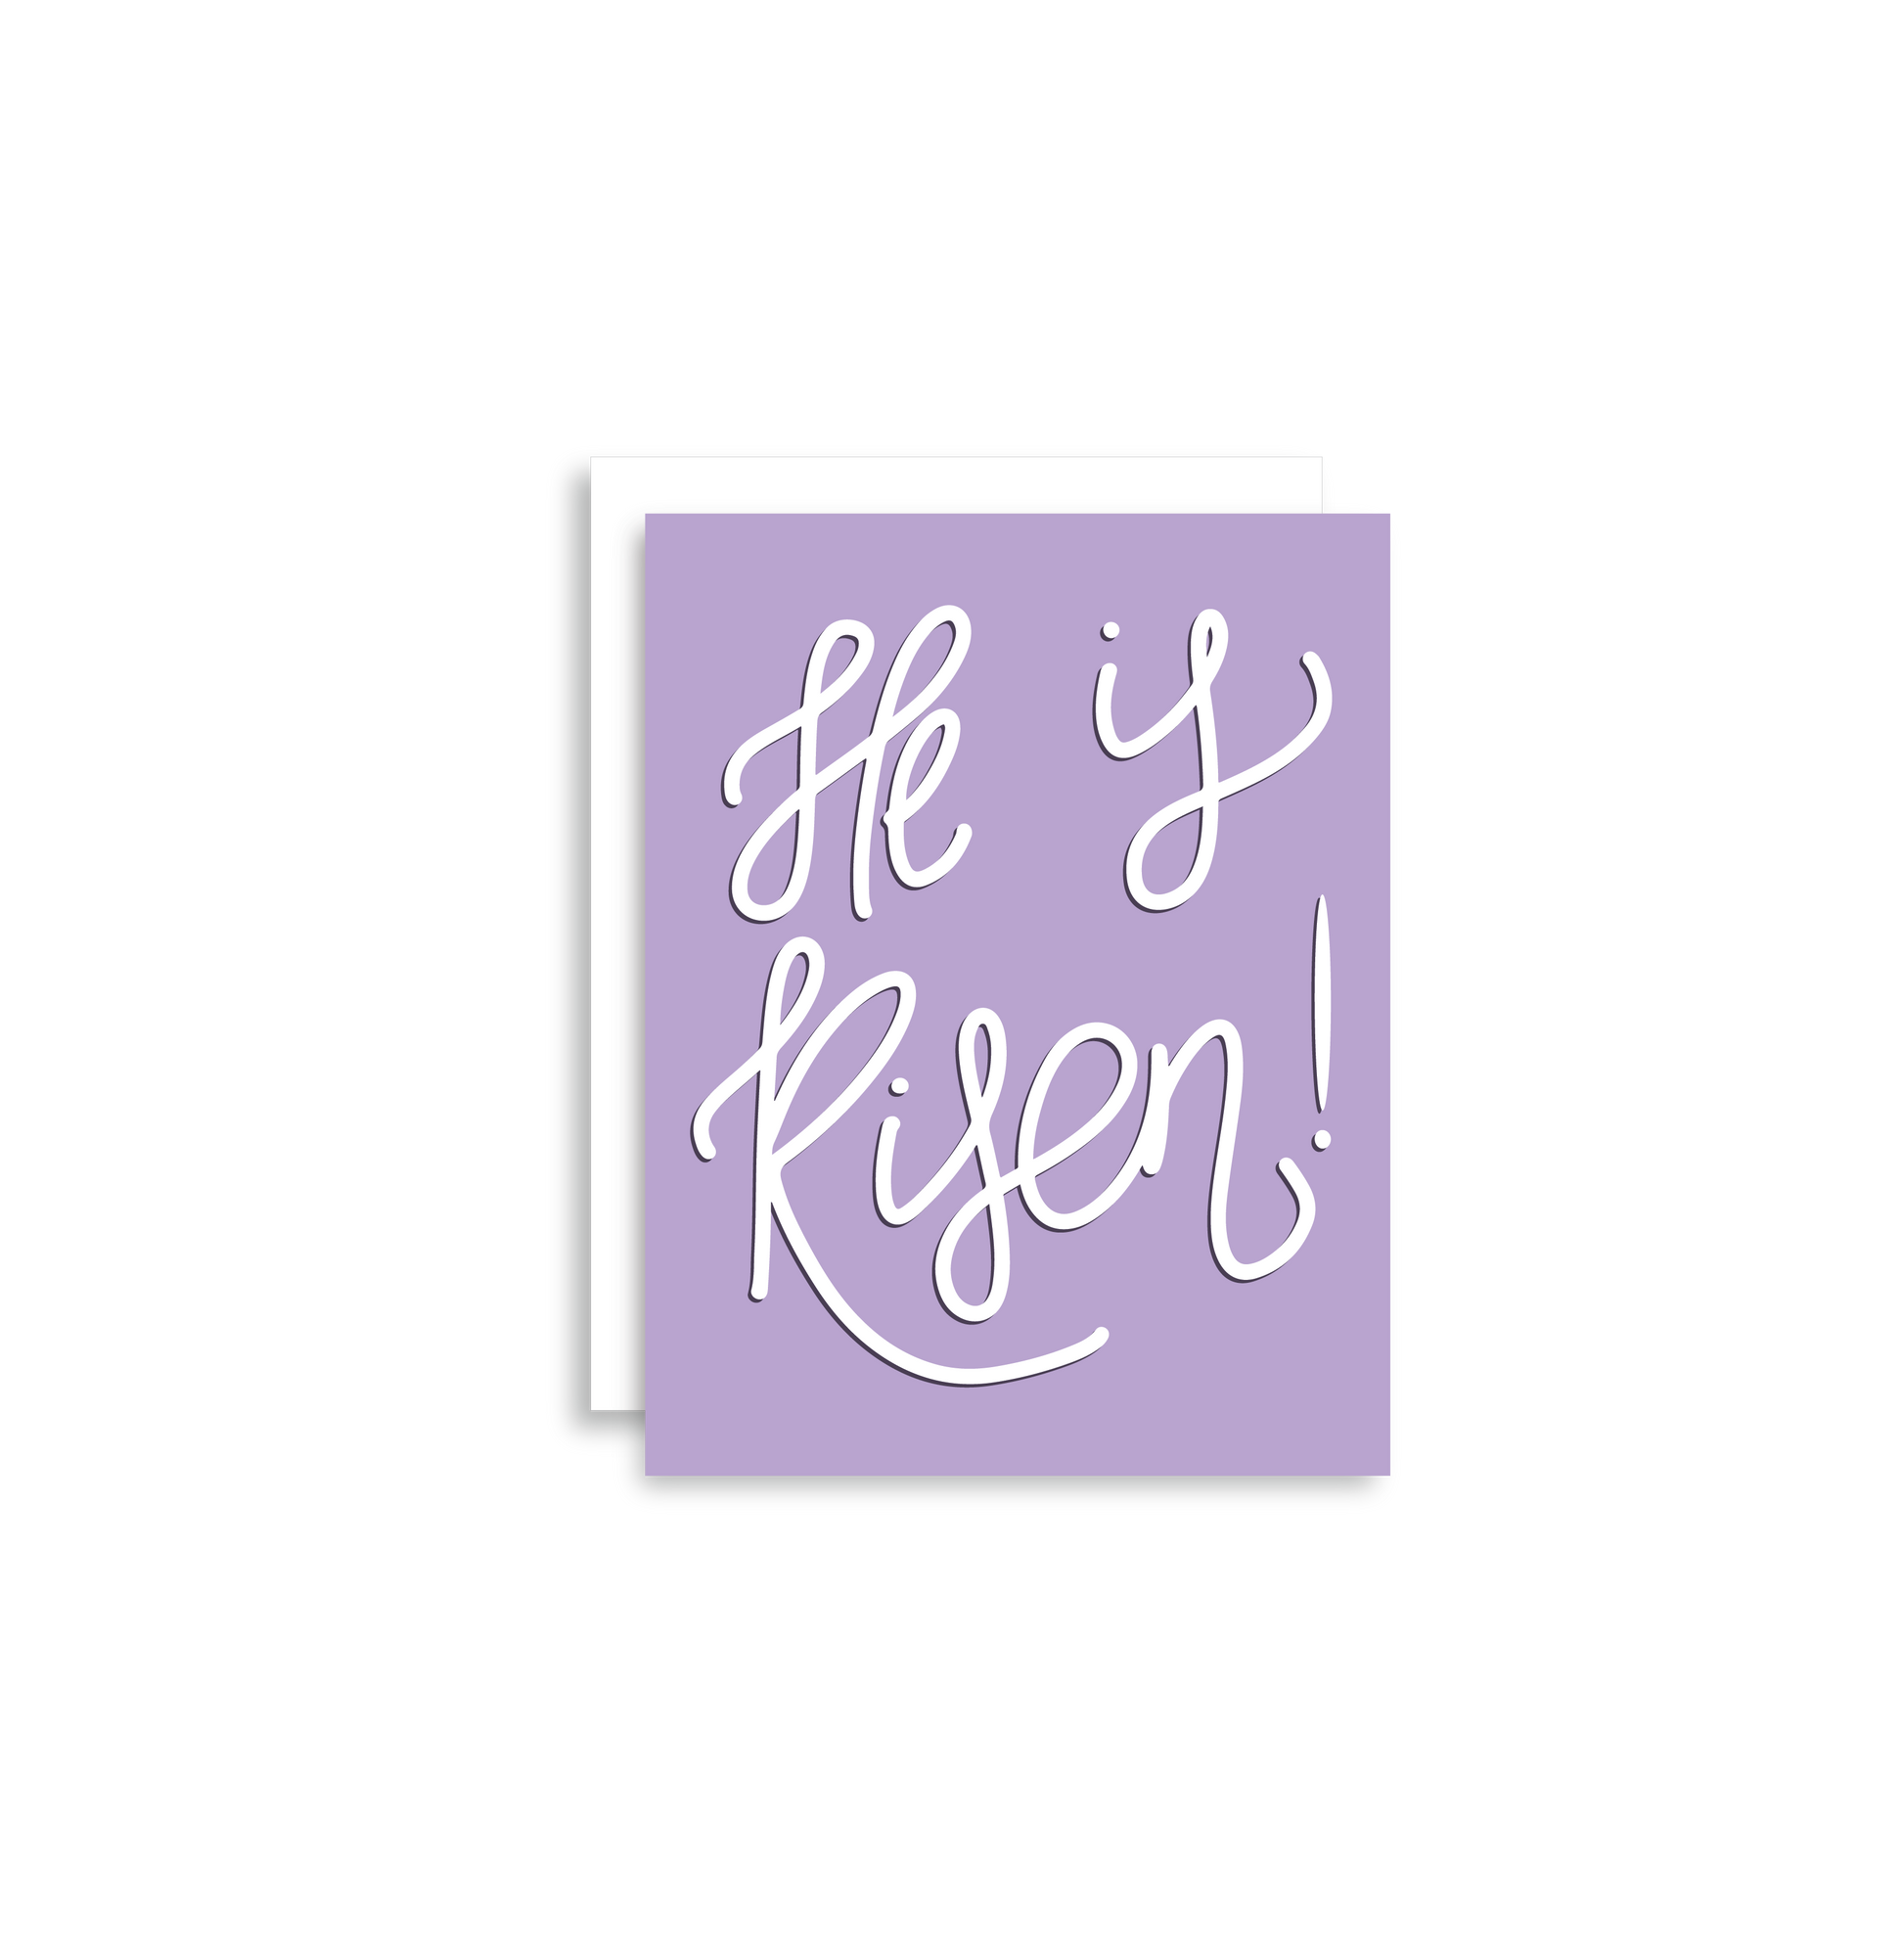 Our "He Is Risen!" card is a simple but perfect way to send Easter greetings! Each card is folded to 4.25" tall by 5.5" wide, is blank inside and comes with a matching white envelope. Cards are packaged in cellophane sleeves.  